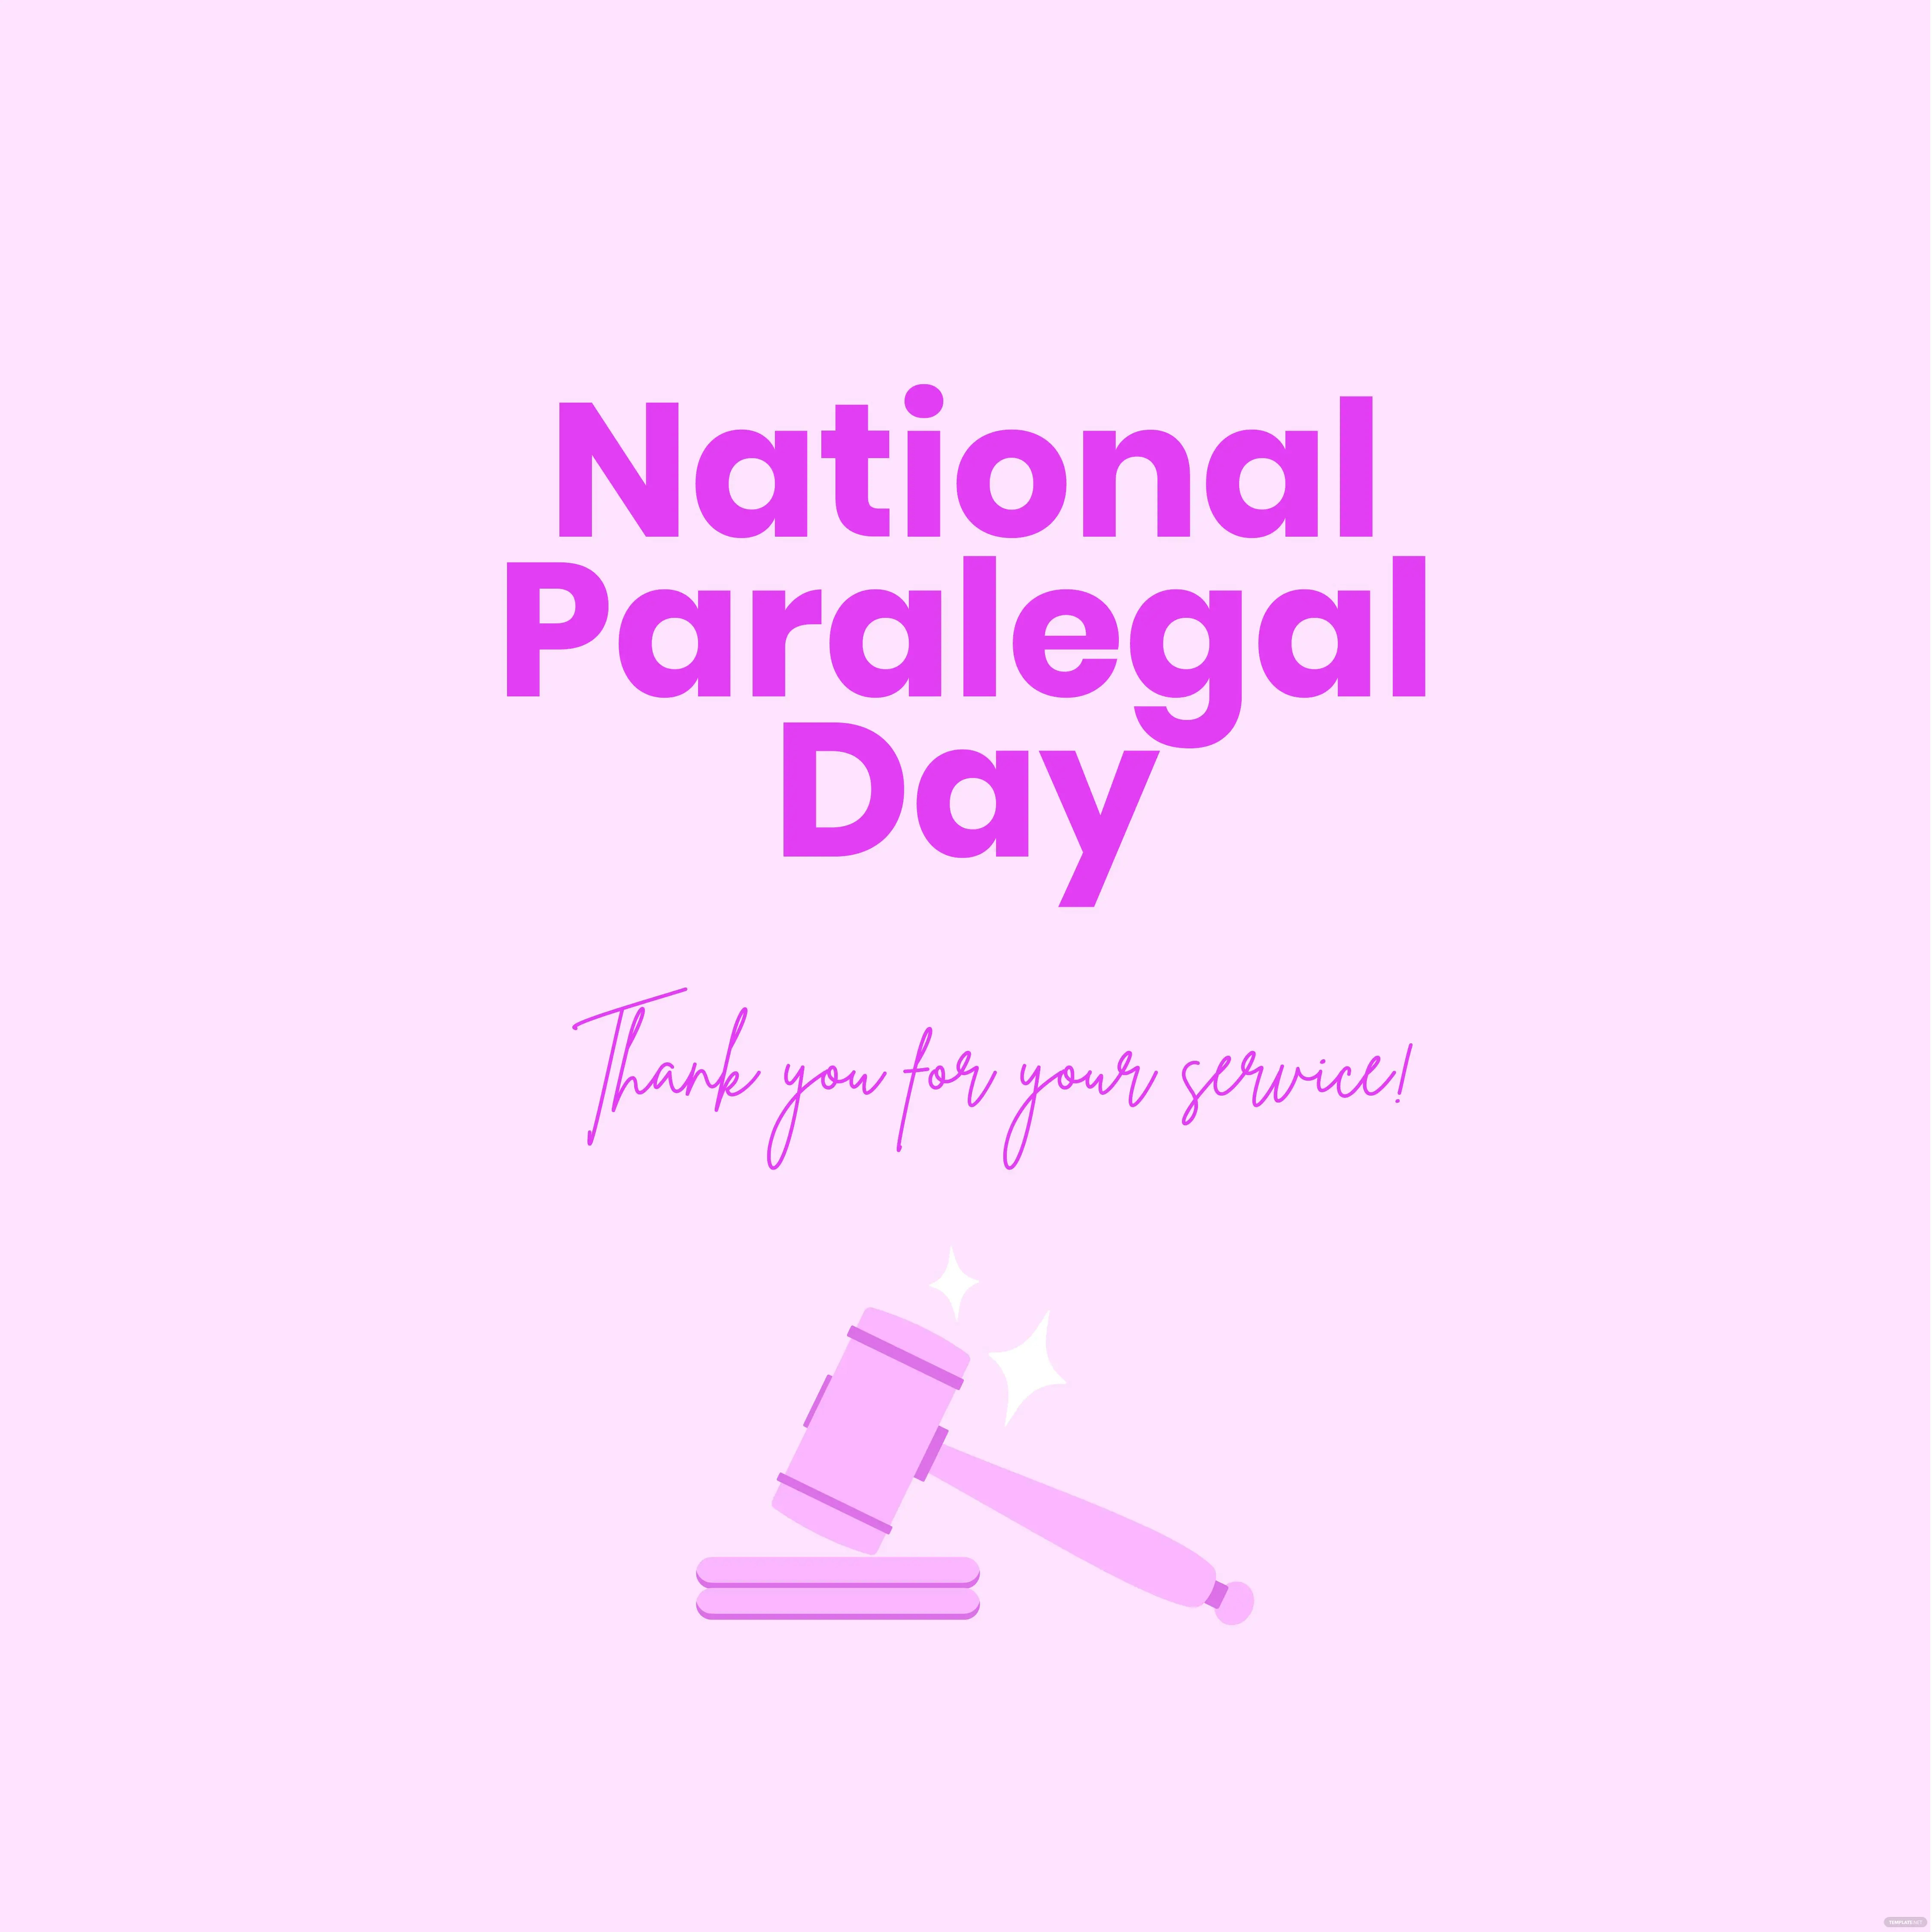 national paralegal day instagram post ideas examples